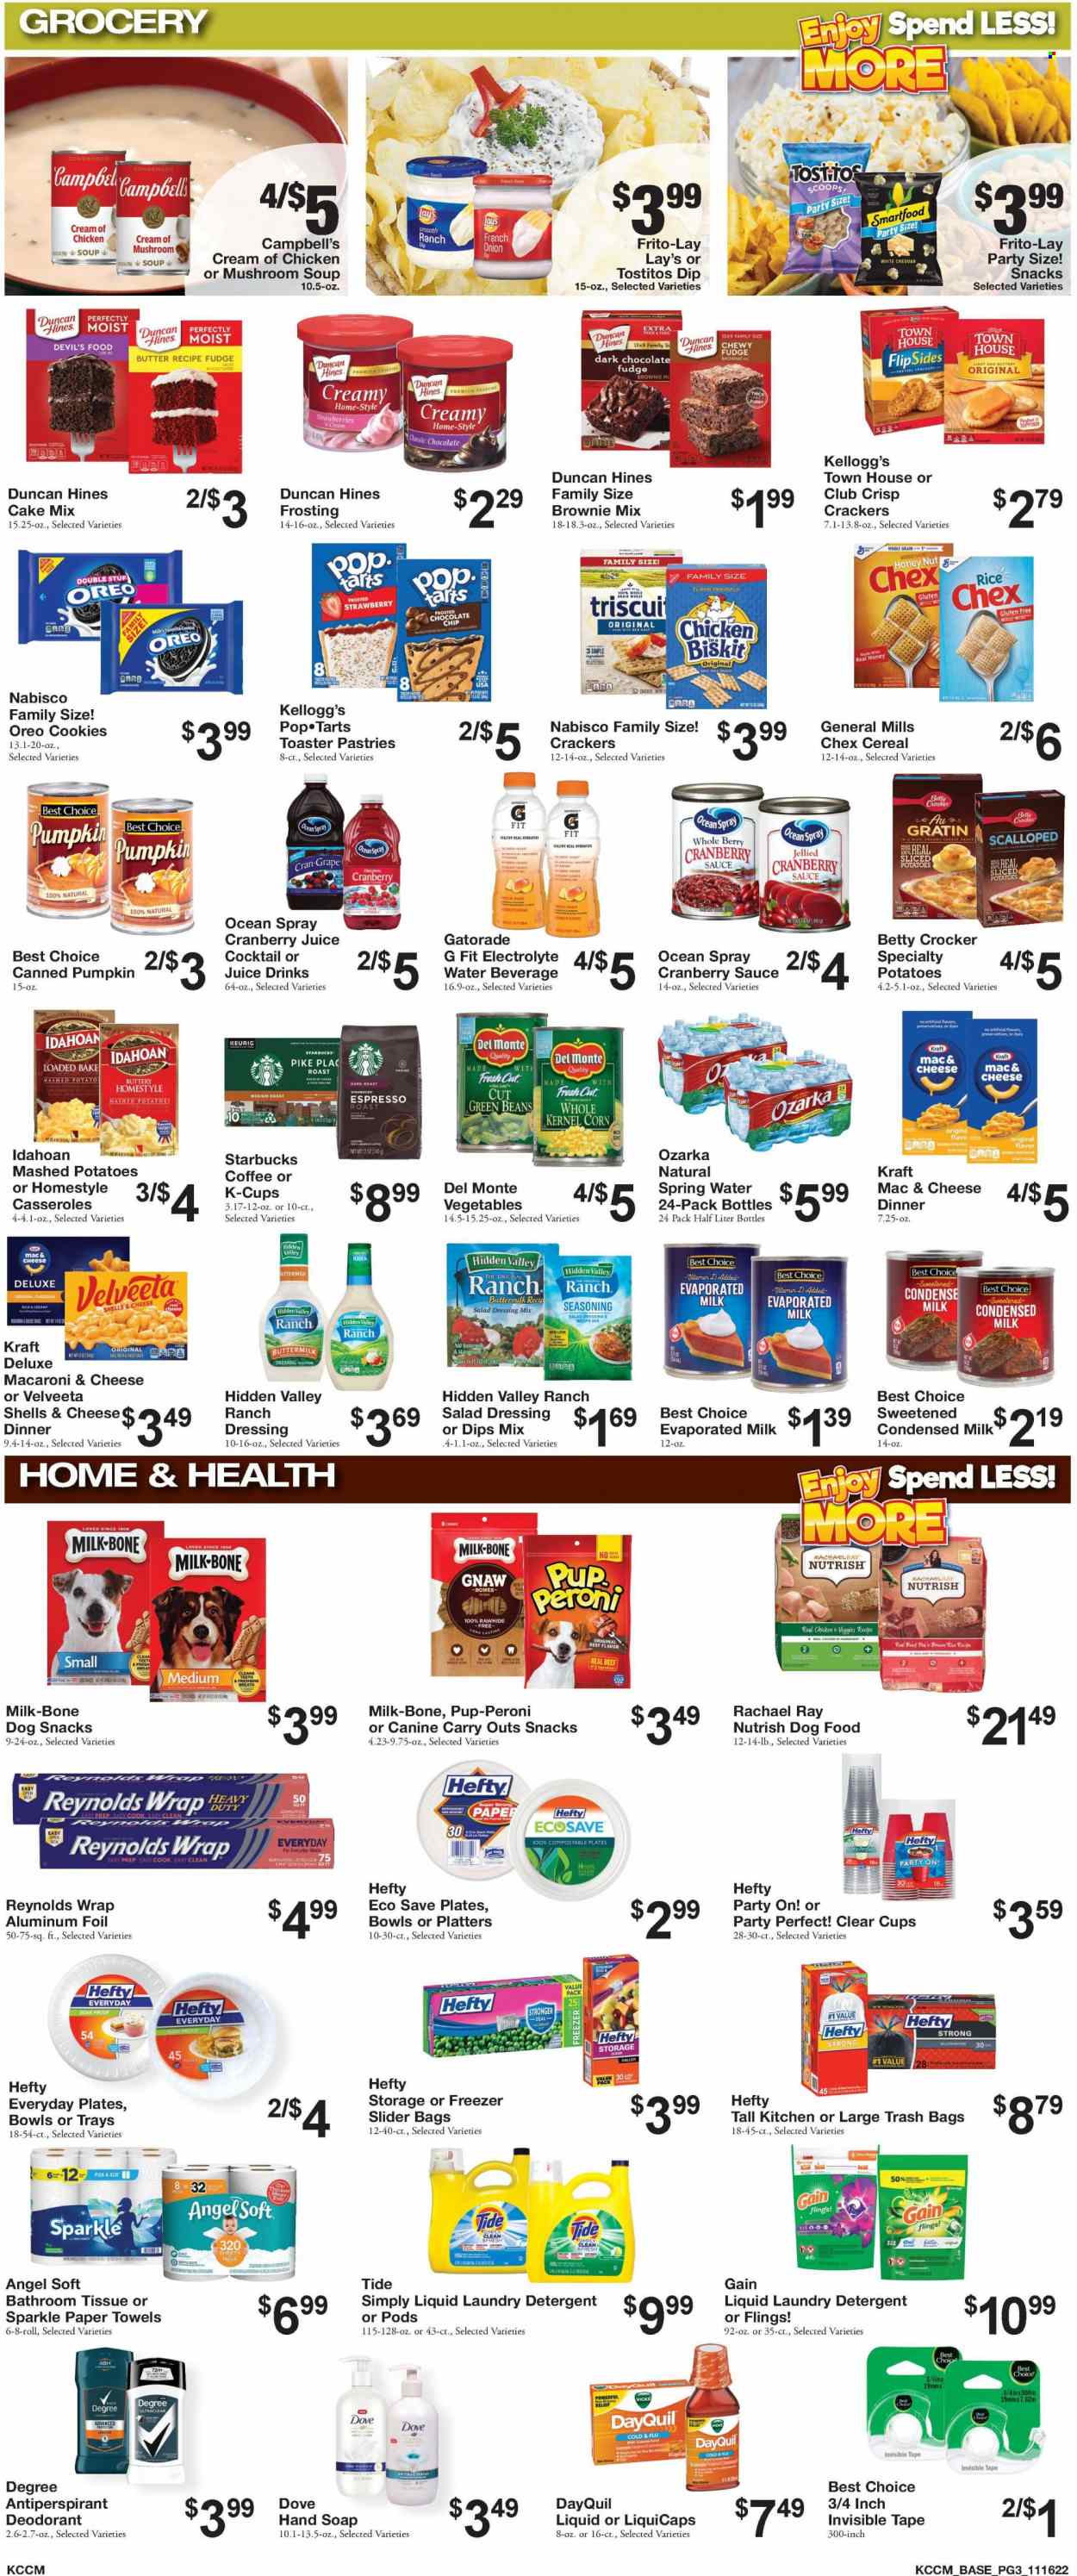 thumbnail - Bratchers Market Flyer - 11/16/2022 - 11/29/2022 - Sales products - pretzels, brownie mix, cake mix, corn, green beans, strawberries, Campbell's, mashed potatoes, mushroom soup, chicken soup, soup, pasta, Kraft®, Oreo, buttermilk, evaporated milk, condensed milk, mayonnaise, ranch dressing, cookies, Dove, fudge, snack, crackers, chewing gum, Kellogg's, dark chocolate, Pop-Tarts, Lay’s, Smartfood, Frito-Lay, Tostitos, frosting, topping, Del Monte, cereals, brown rice, spice, salad dressing, dressing, cranberry sauce, cranberry juice, juice, Cran-Grape, Gatorade, spring water, coffee, Starbucks, K-Cups, Keurig, bath tissue, kitchen towels, paper towels, detergent, Gain, Tide, laundry detergent, hand soap, soap, anti-perspirant, deodorant, Vicks, Hefty, trash bags, aluminium foil, animal food, dog food, Pup-Peroni, Nutrish, DayQuil, Cold & Flu. Page 3.